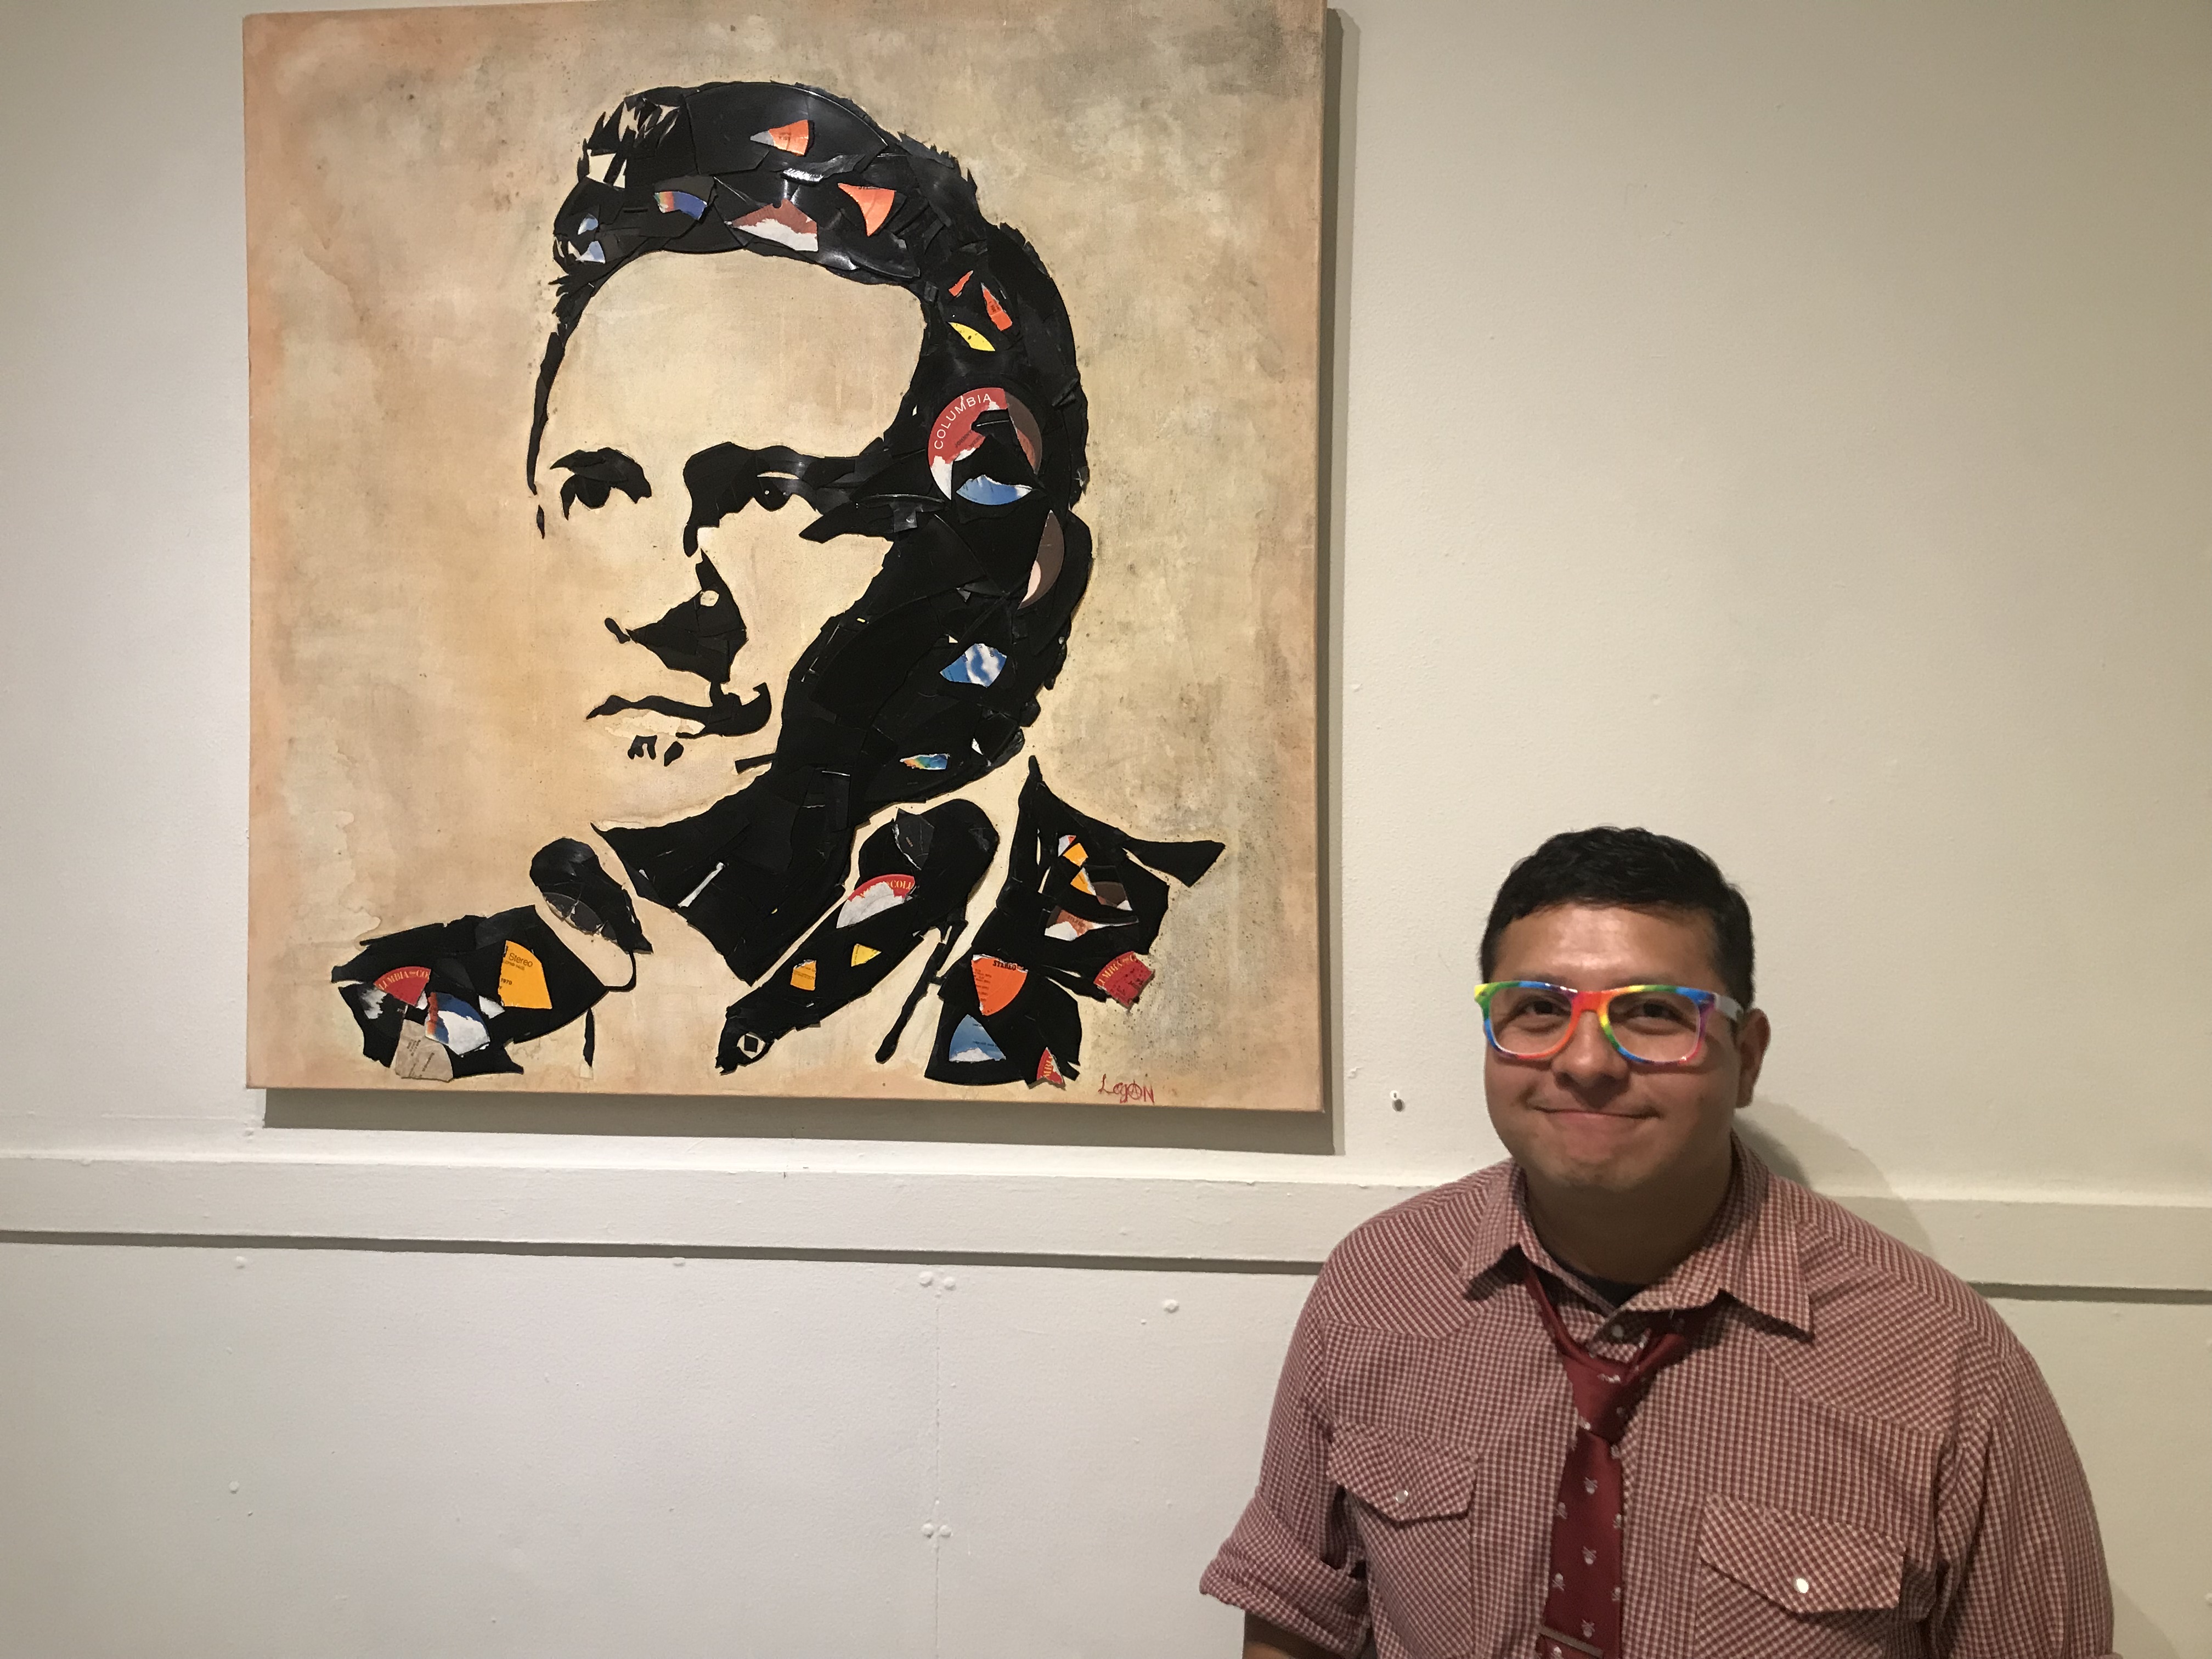 A man with short dark hair wearing a red shirt and rainbow glasses stands in front of a portrait of a man